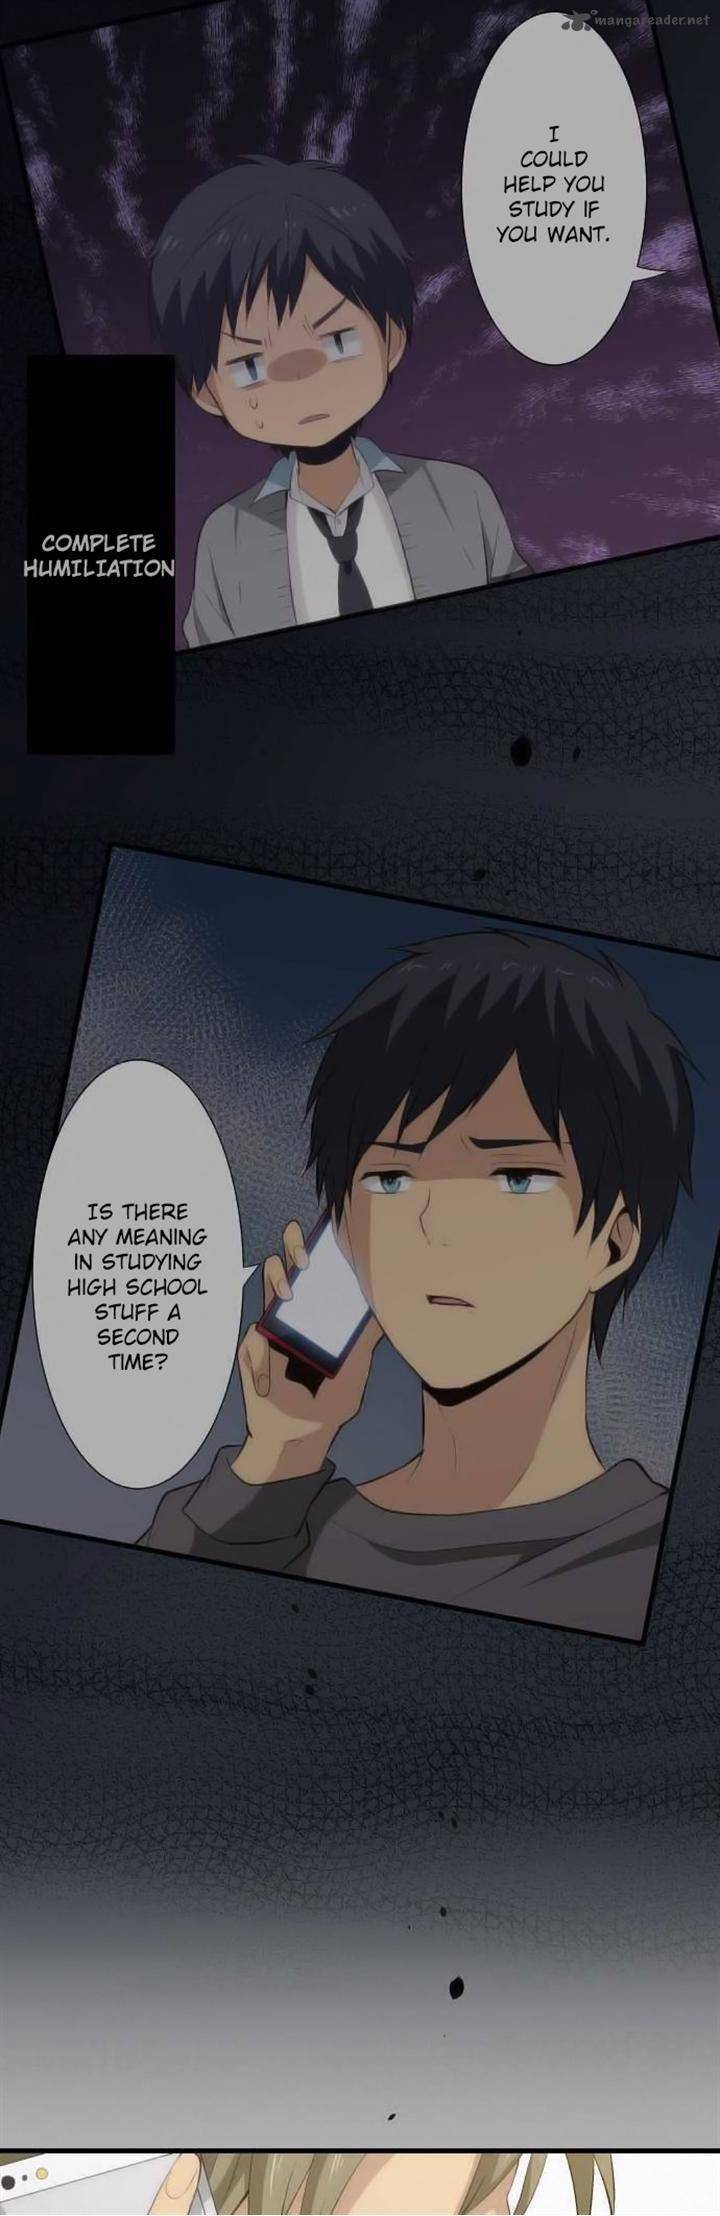 Relife 61 17